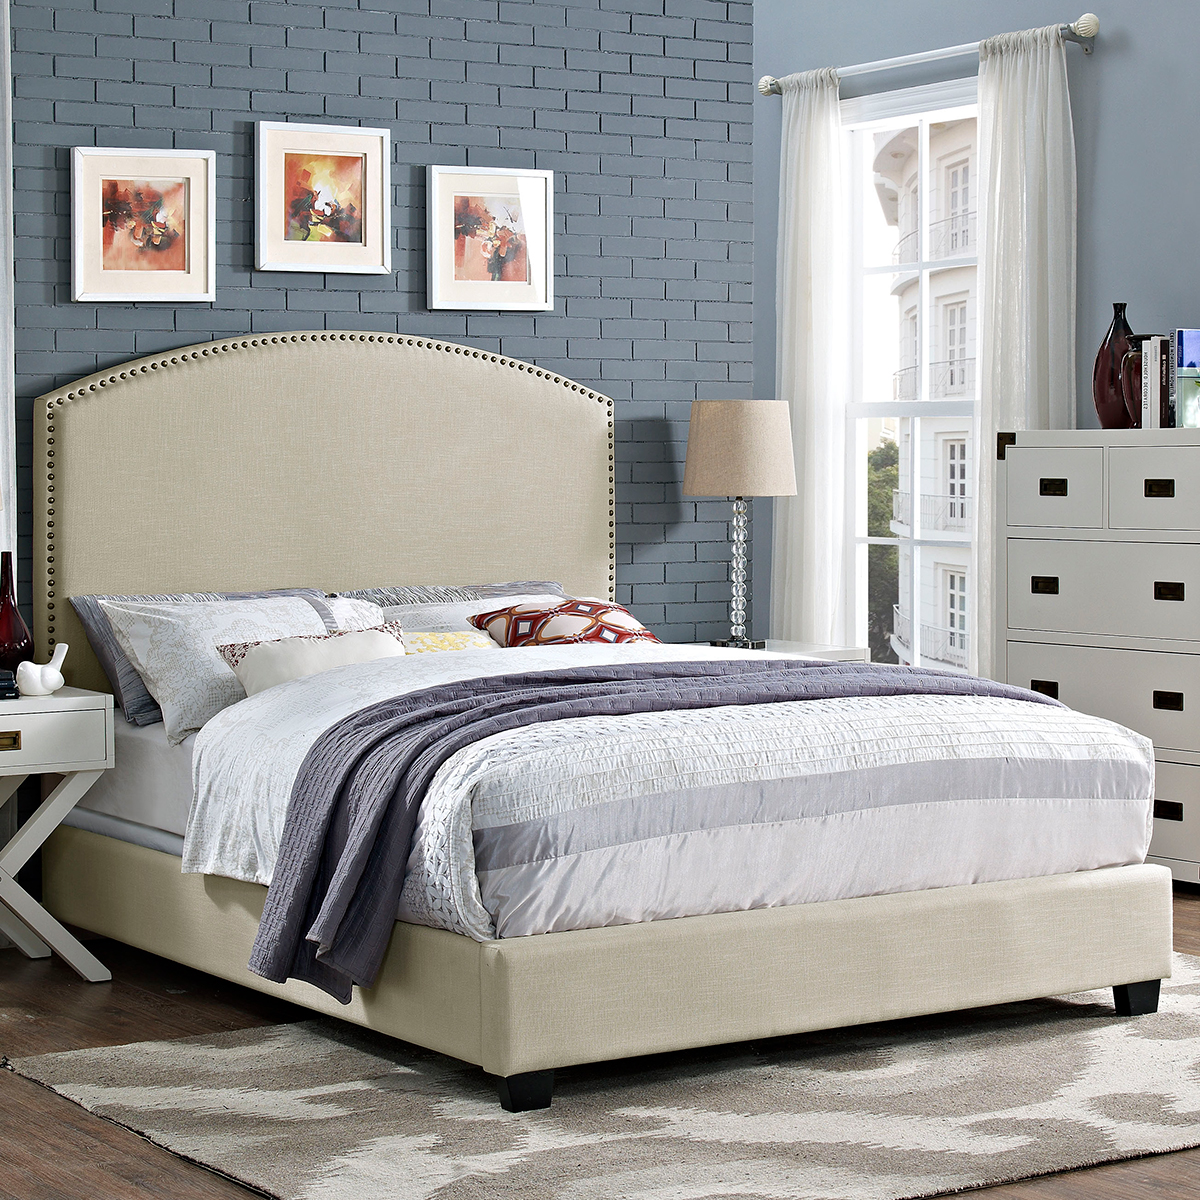 Kf705008cr Cassie Curved Upholstered Queen Bedset, Creme Linen